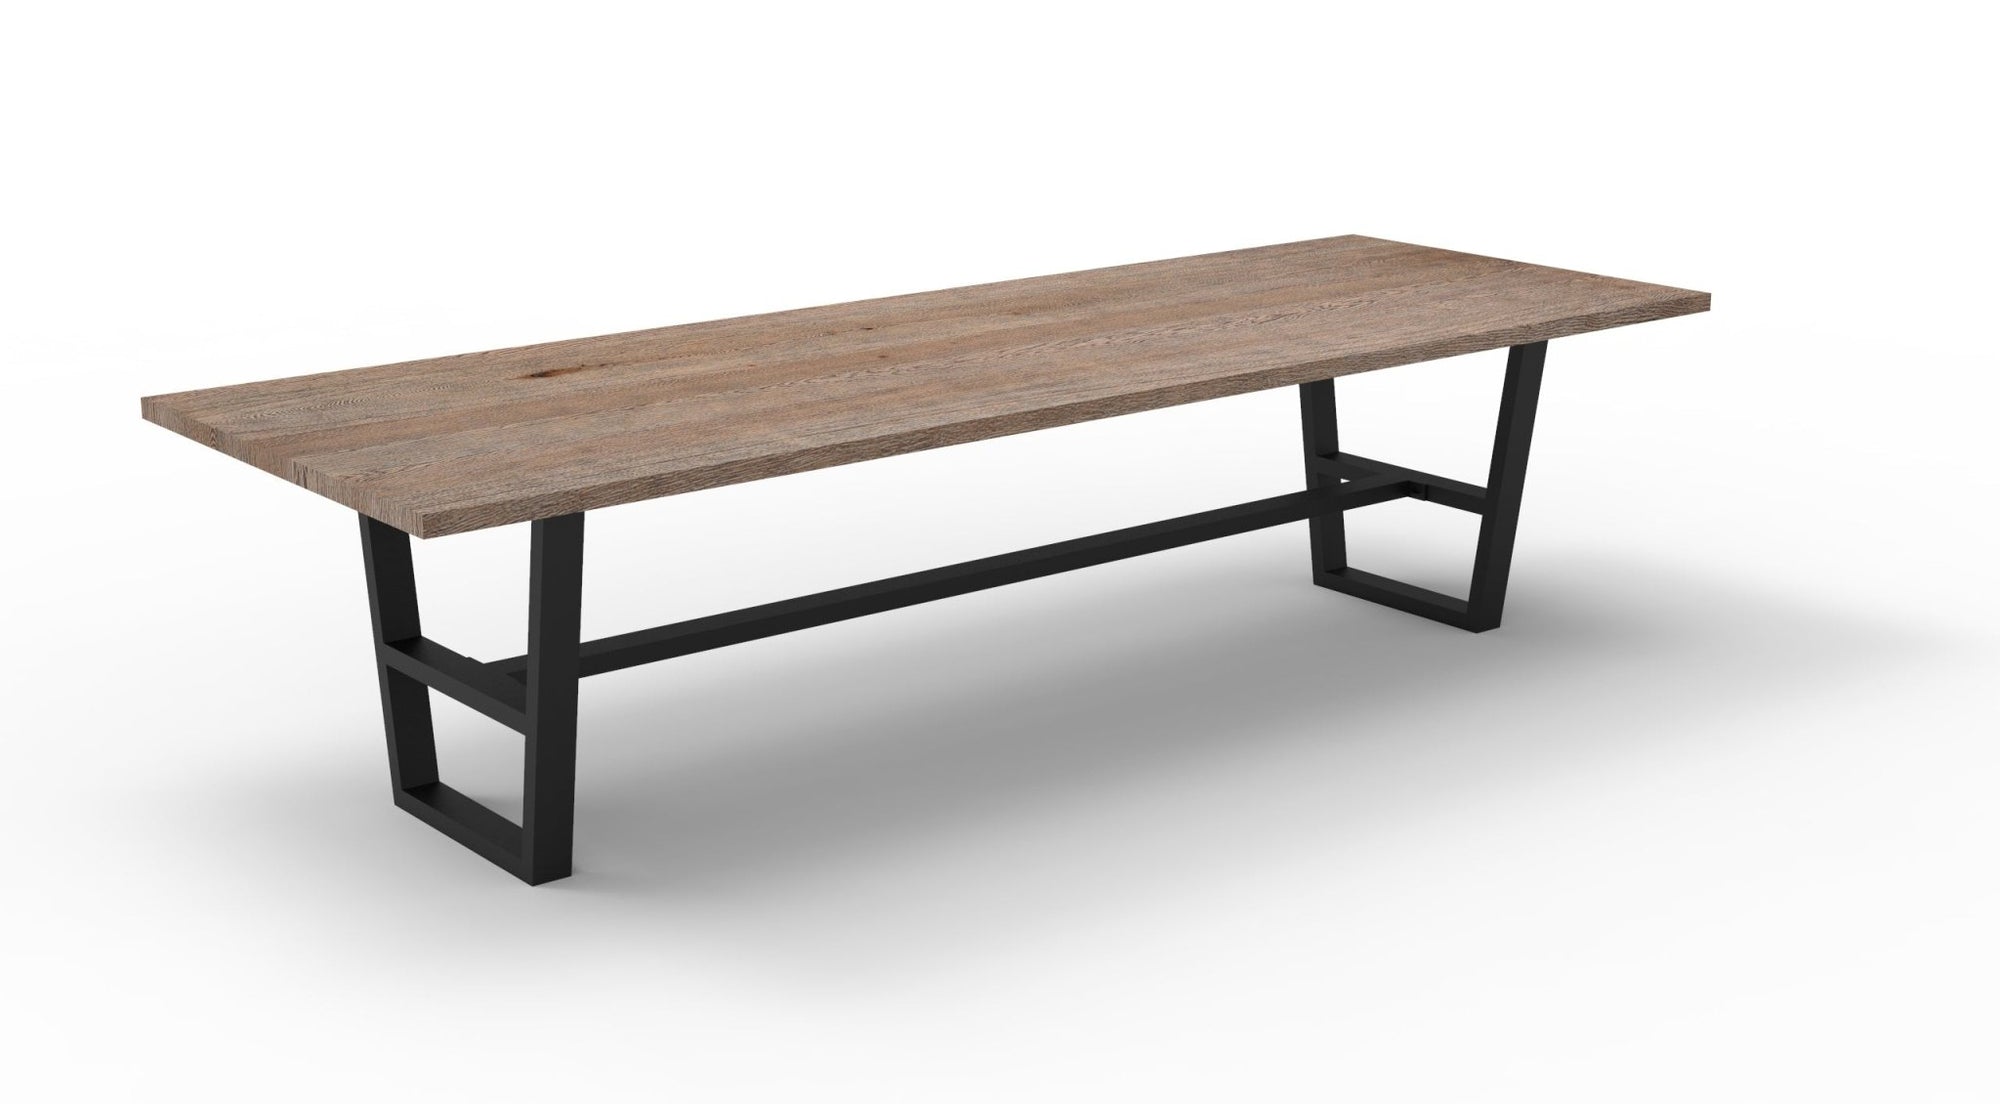 Wallace 120" Oak Dining Table - Sandblasted Natural - snyders.furniture